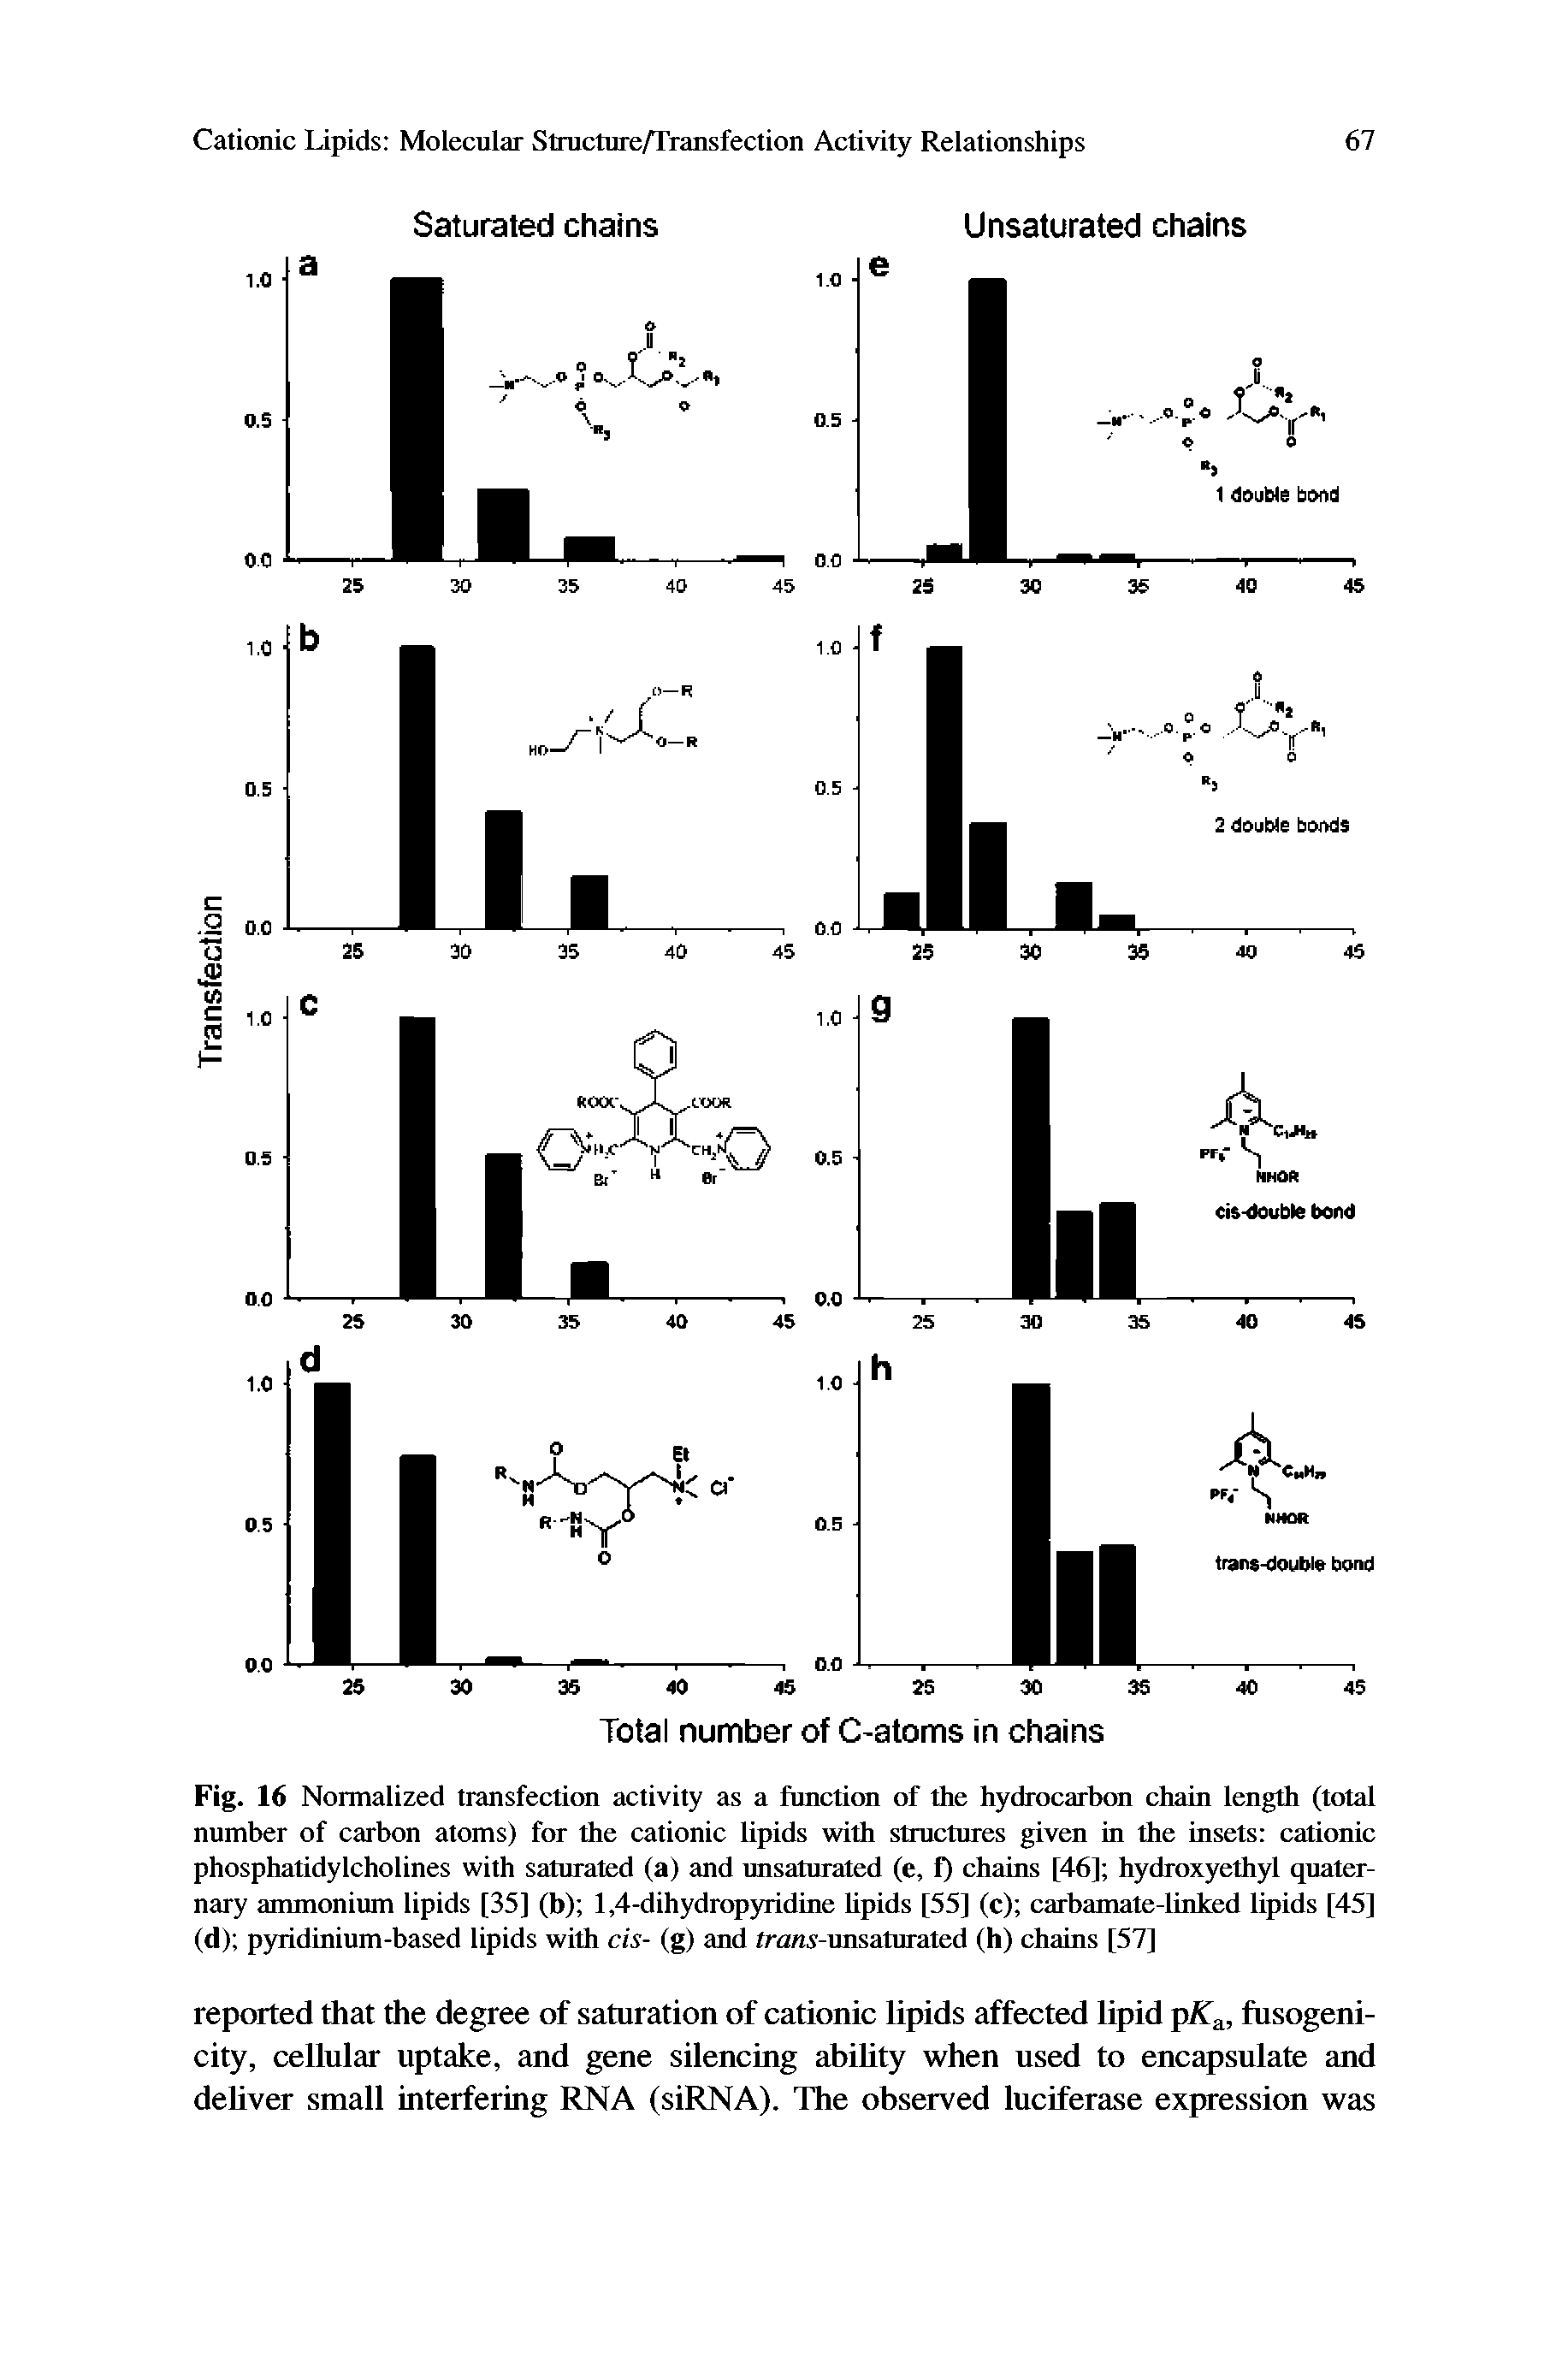 Fig. 16 Normalized transfection activity as a function of the hydrocarbon chain length (total number of carbon atoms) for the cationic lipids with structures given in the insets cationic phosphatidylcholines with saturated (a) and unsaturated (e, f) chains [46] hydroxyethyl quaternary ammonium lipids [35] (b) 1,4-dihydropyridine lipids [55] (c) carbamate-linked lipids [45] (d) pyridinium-based lipids with cis- (g) and /ra/u-unsaturated (h) chains [57]...